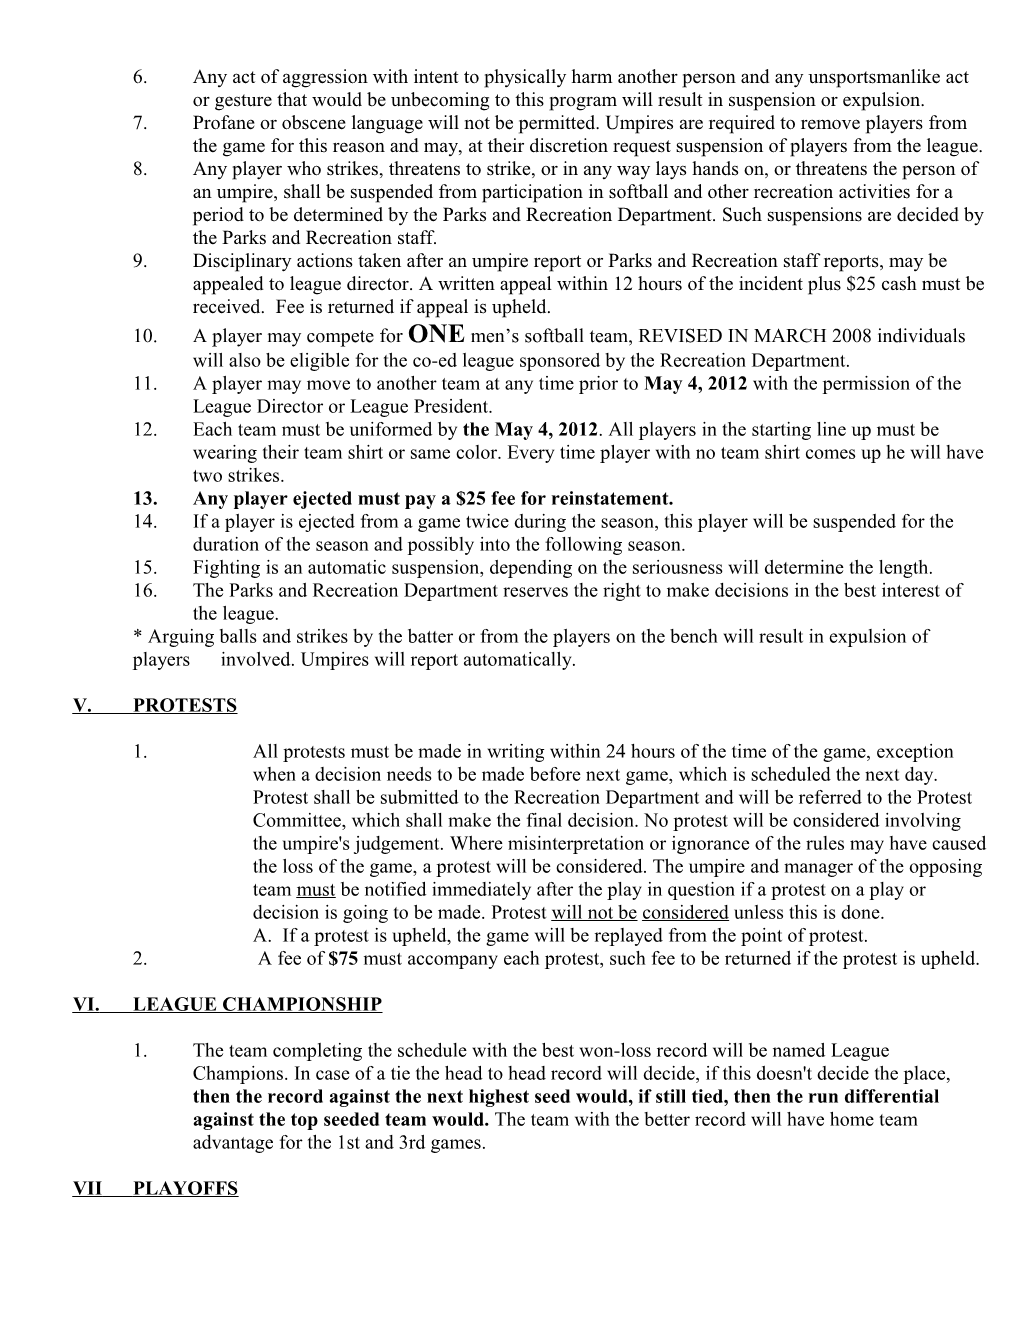 Rules and Regulations for Vernon Men's Softball